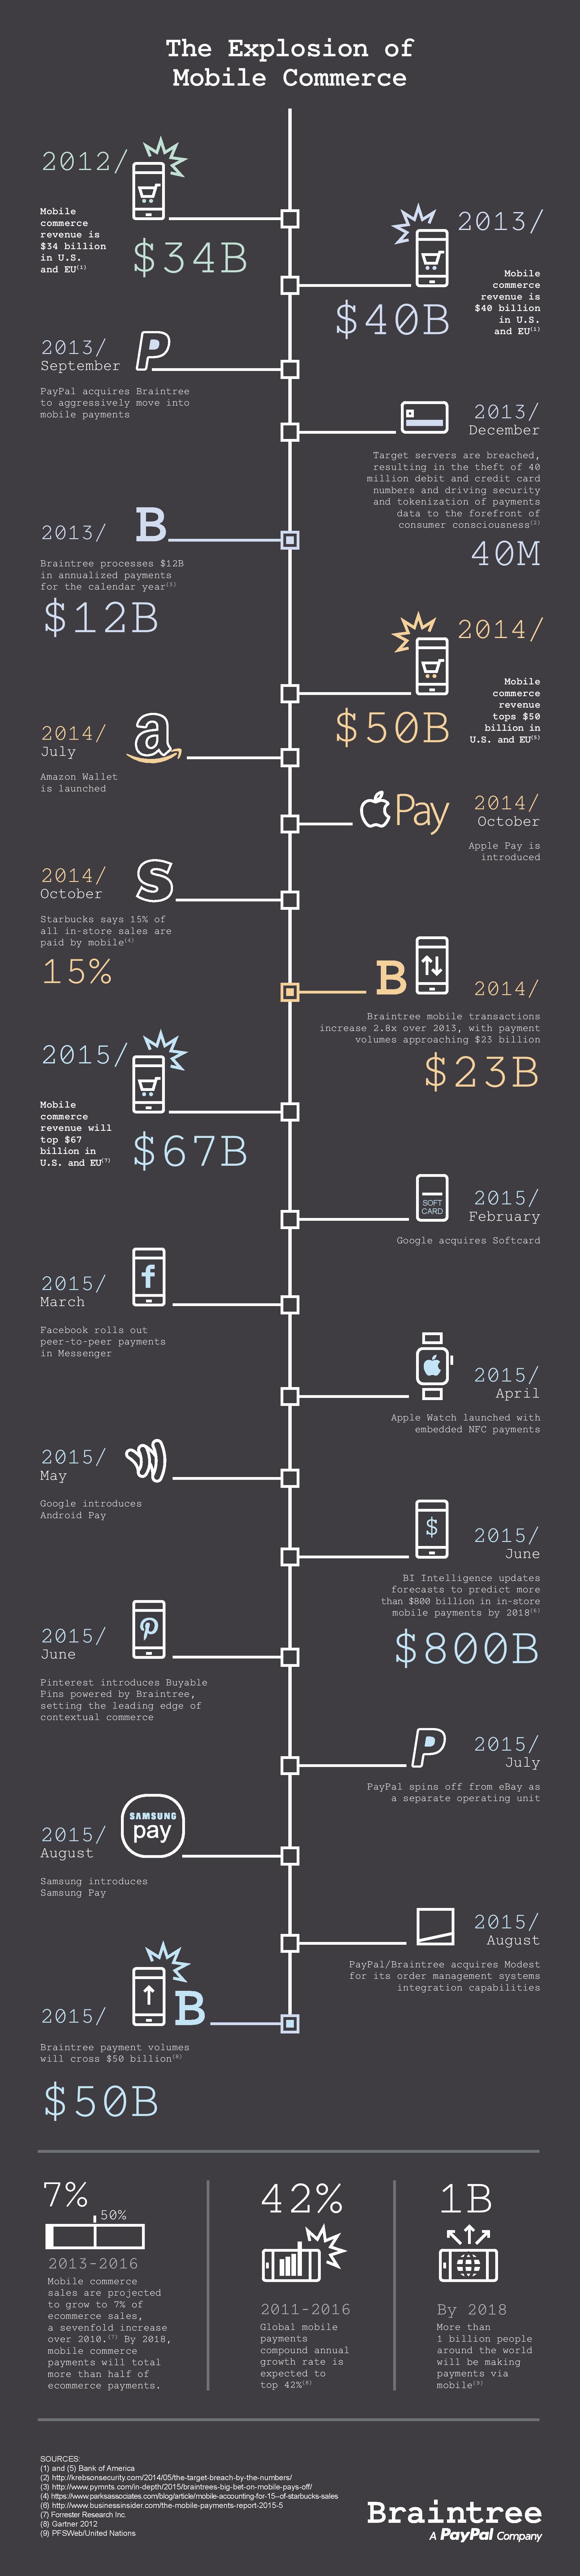 INFOGRAPHIC Braintree - The Explosion of Mobile Commerce 2013-2015 FINAL DRAFT UPDATE-page-001